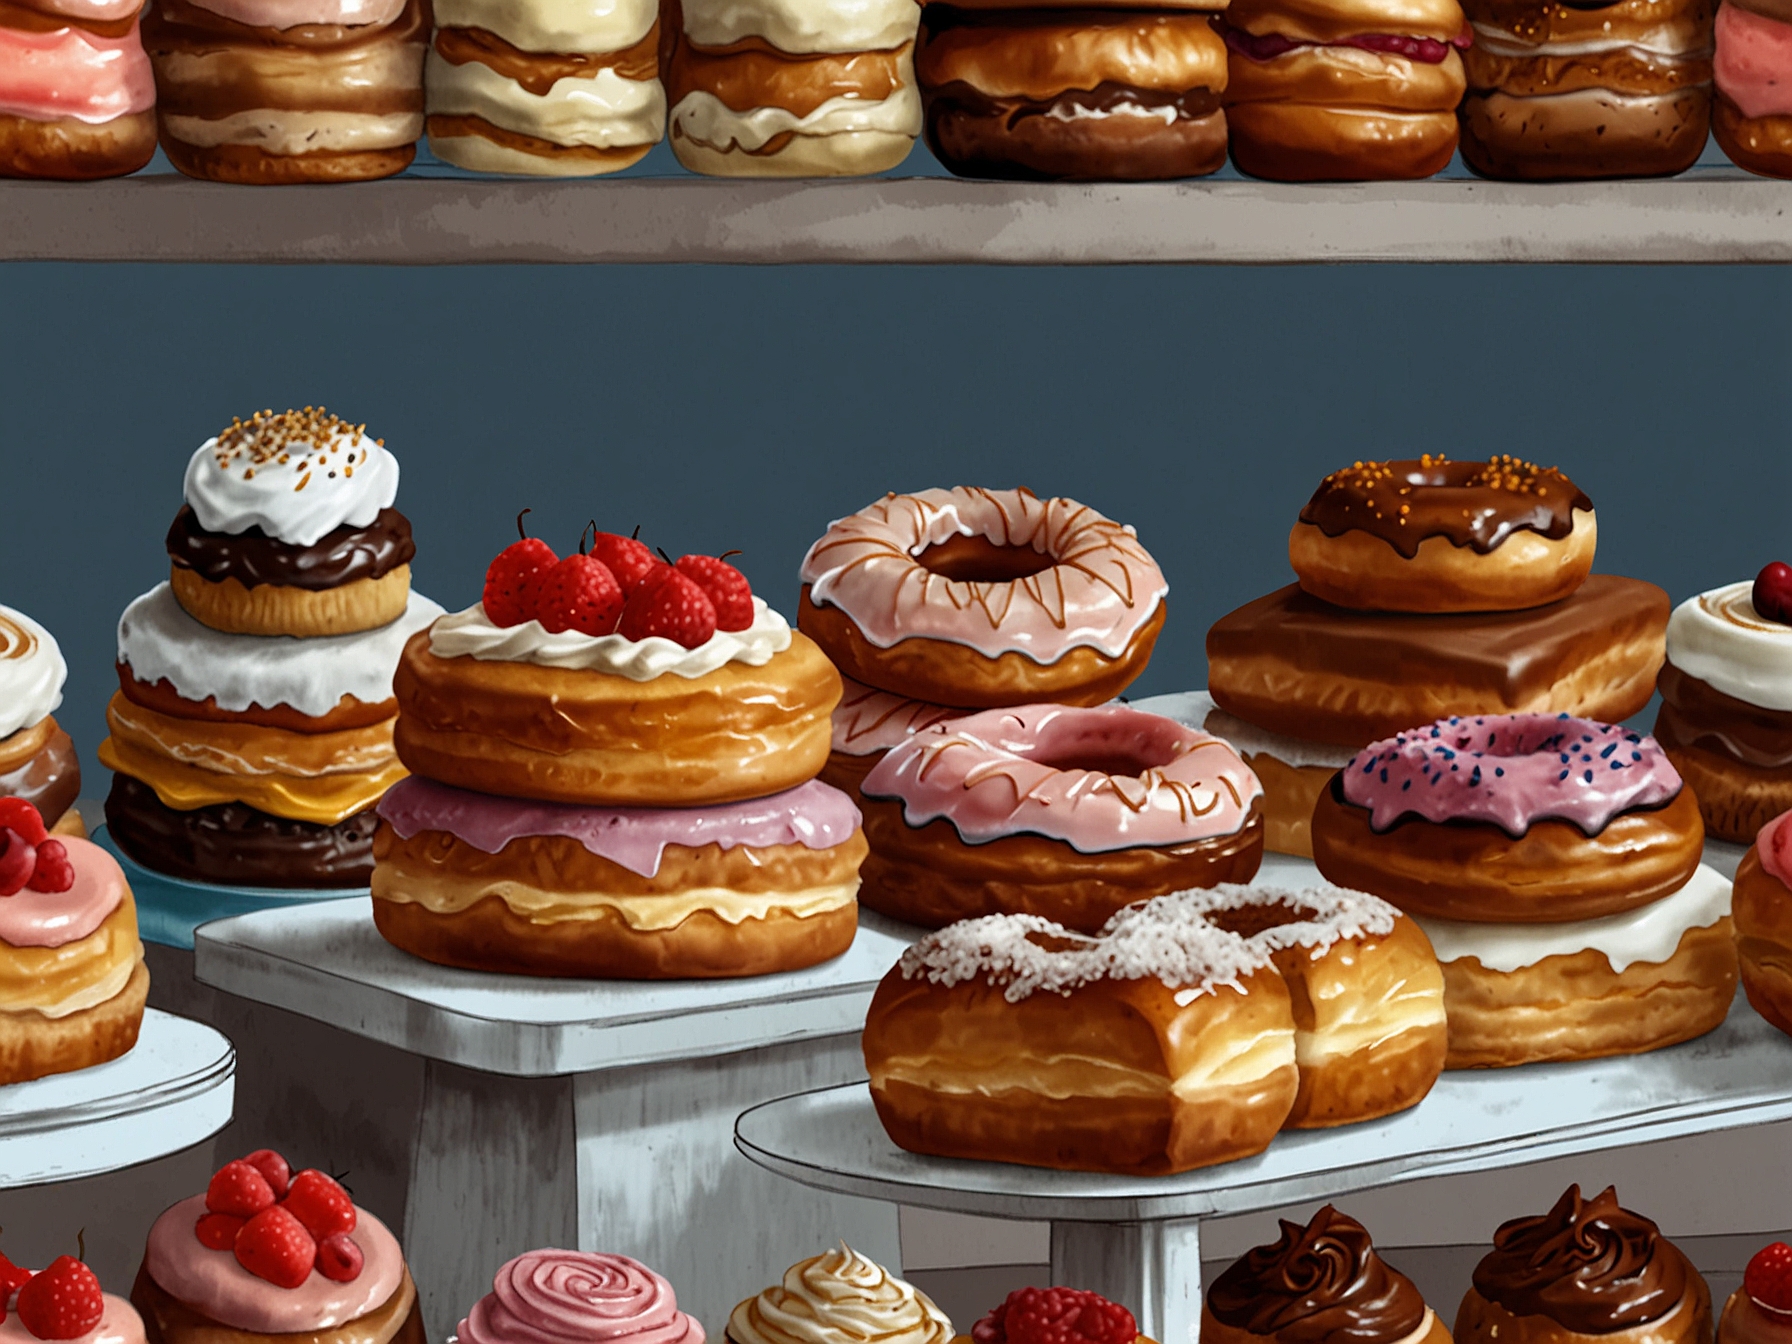 A vibrant display of Dominique Ansel Bakery's pastries, showcasing the famous Cronut, highlighting their innovative and visually stunning creations.